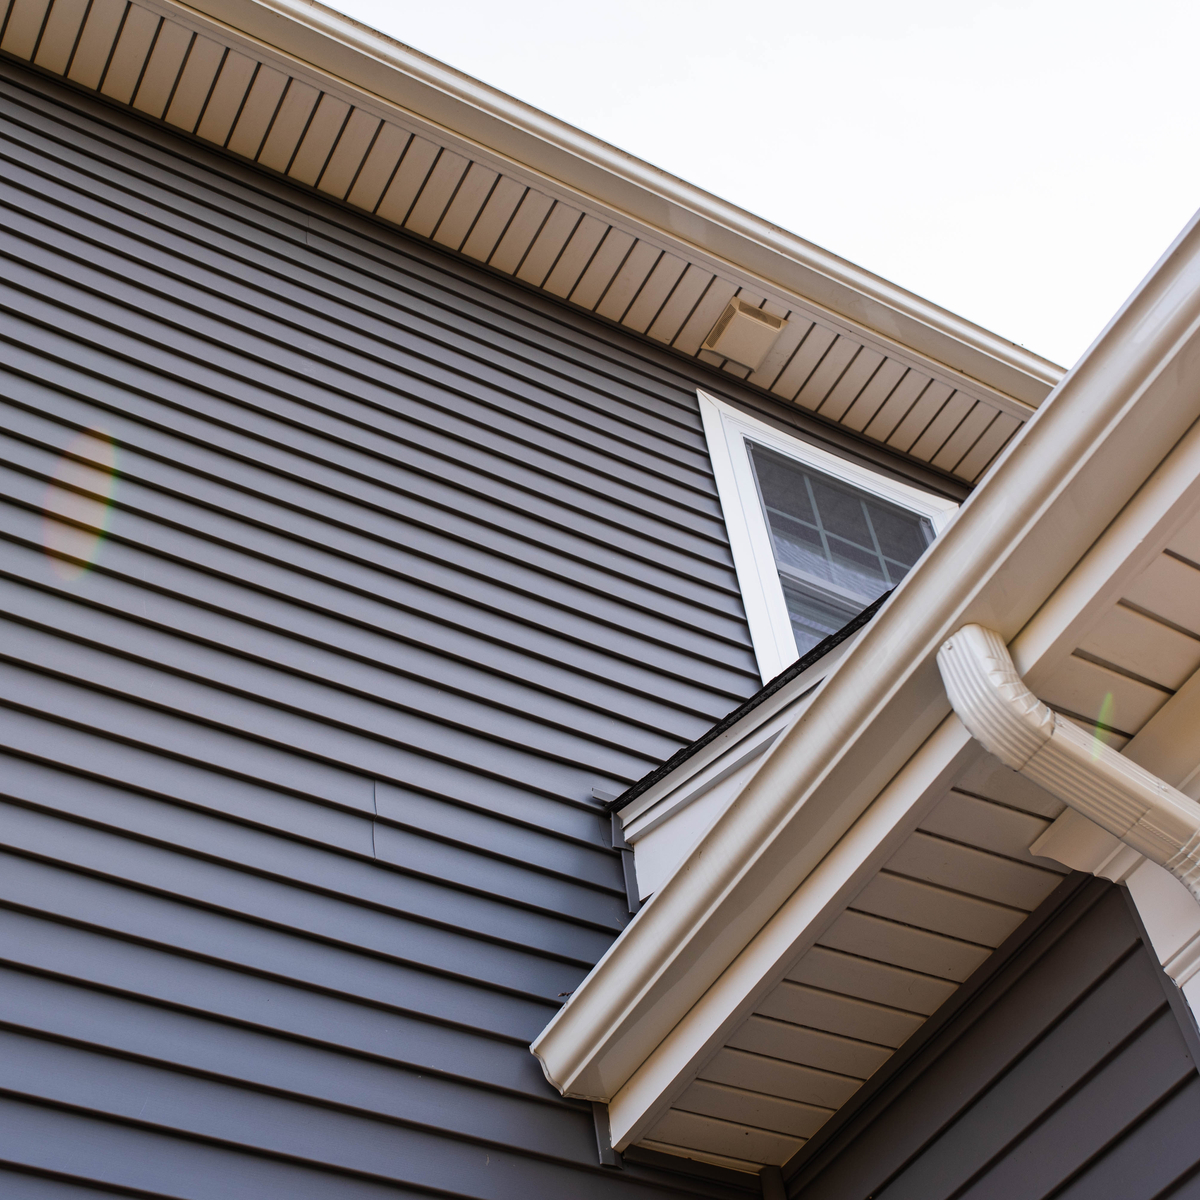 Let Us Be Your Vinyl Siding Company For Installation & Repair-Replacement Service In Covington